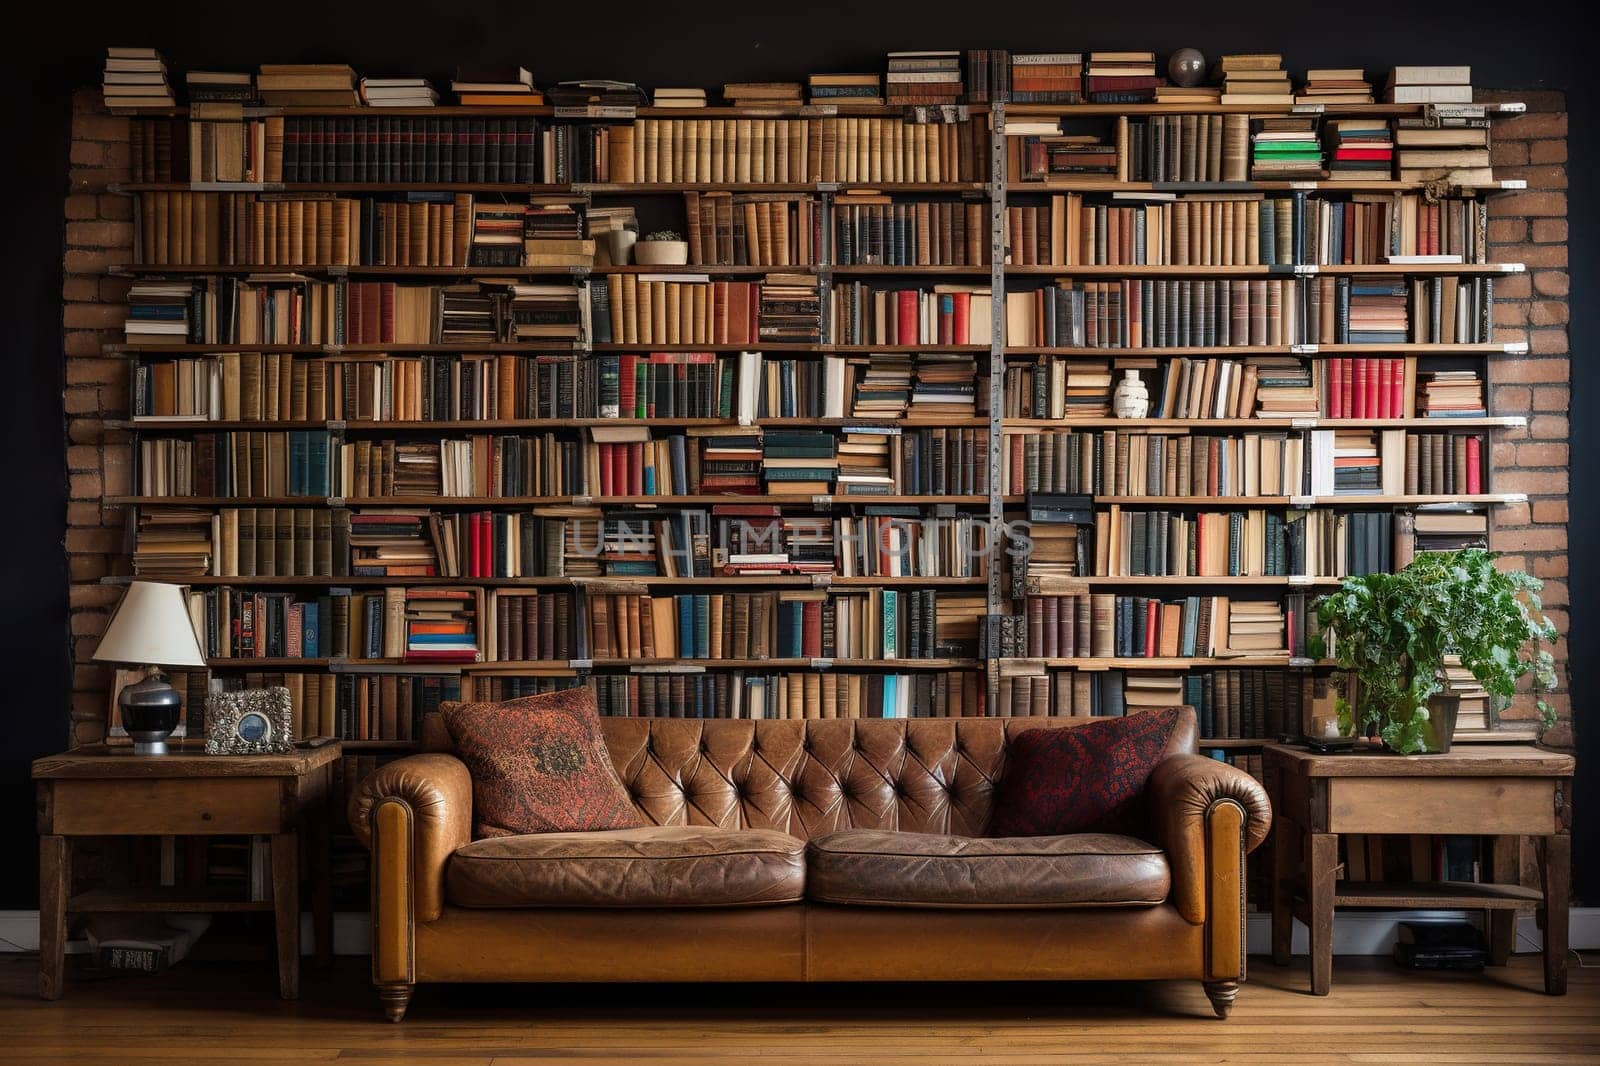 A wall with overflowing bookshelves up to the ceiling, a sofa next to the bookshelves. Generated by artificial intelligence by Vovmar